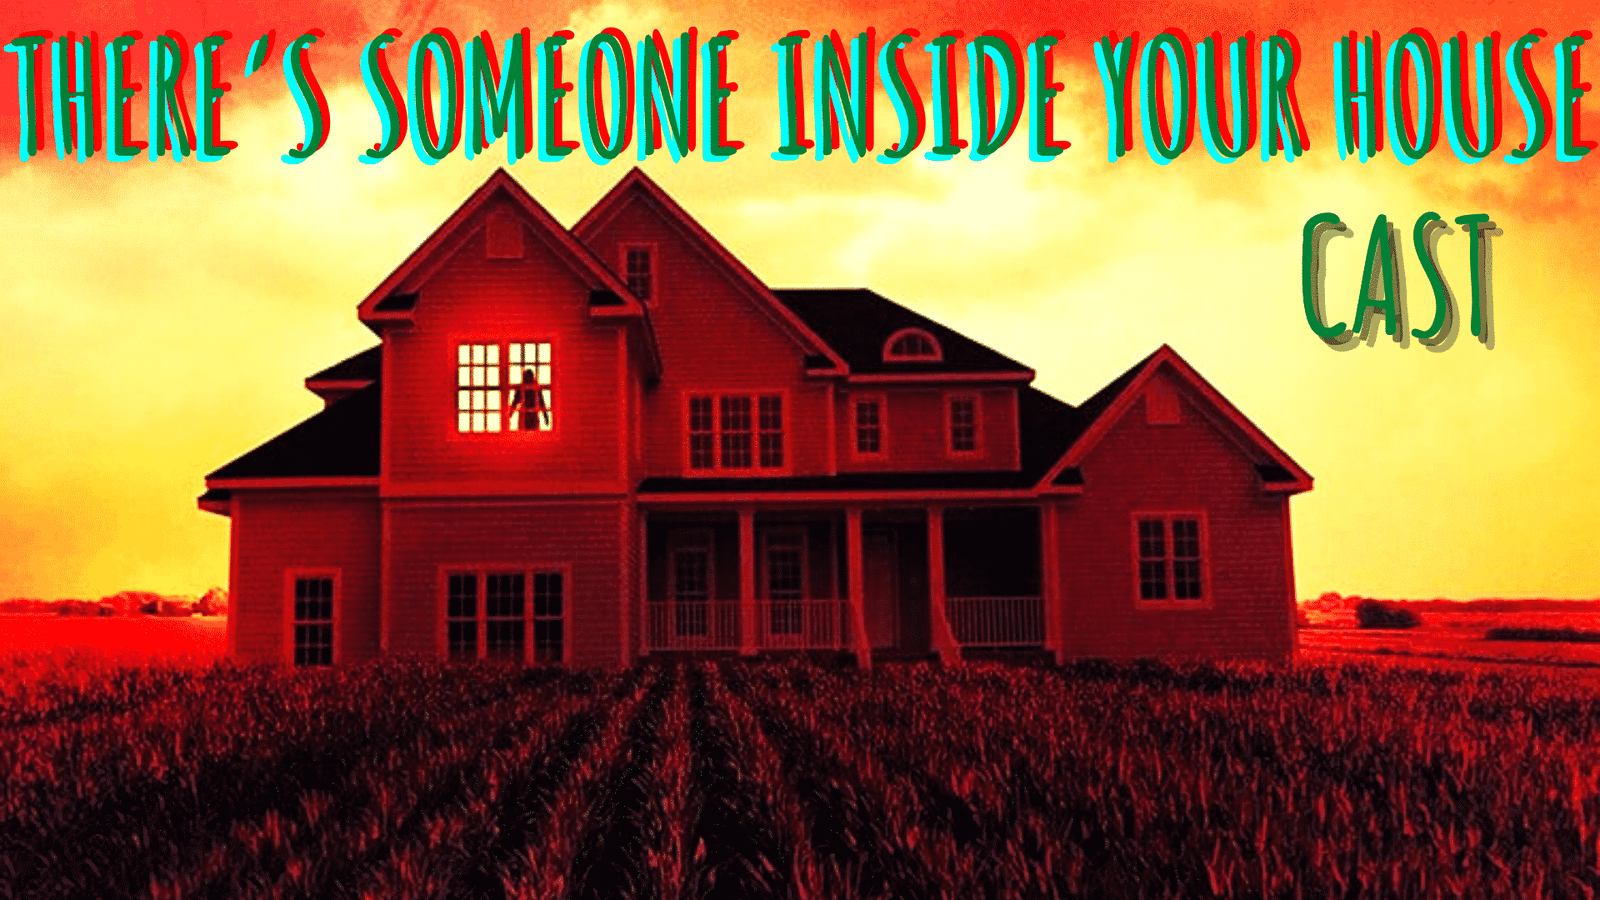 There’s someone inside your house poster